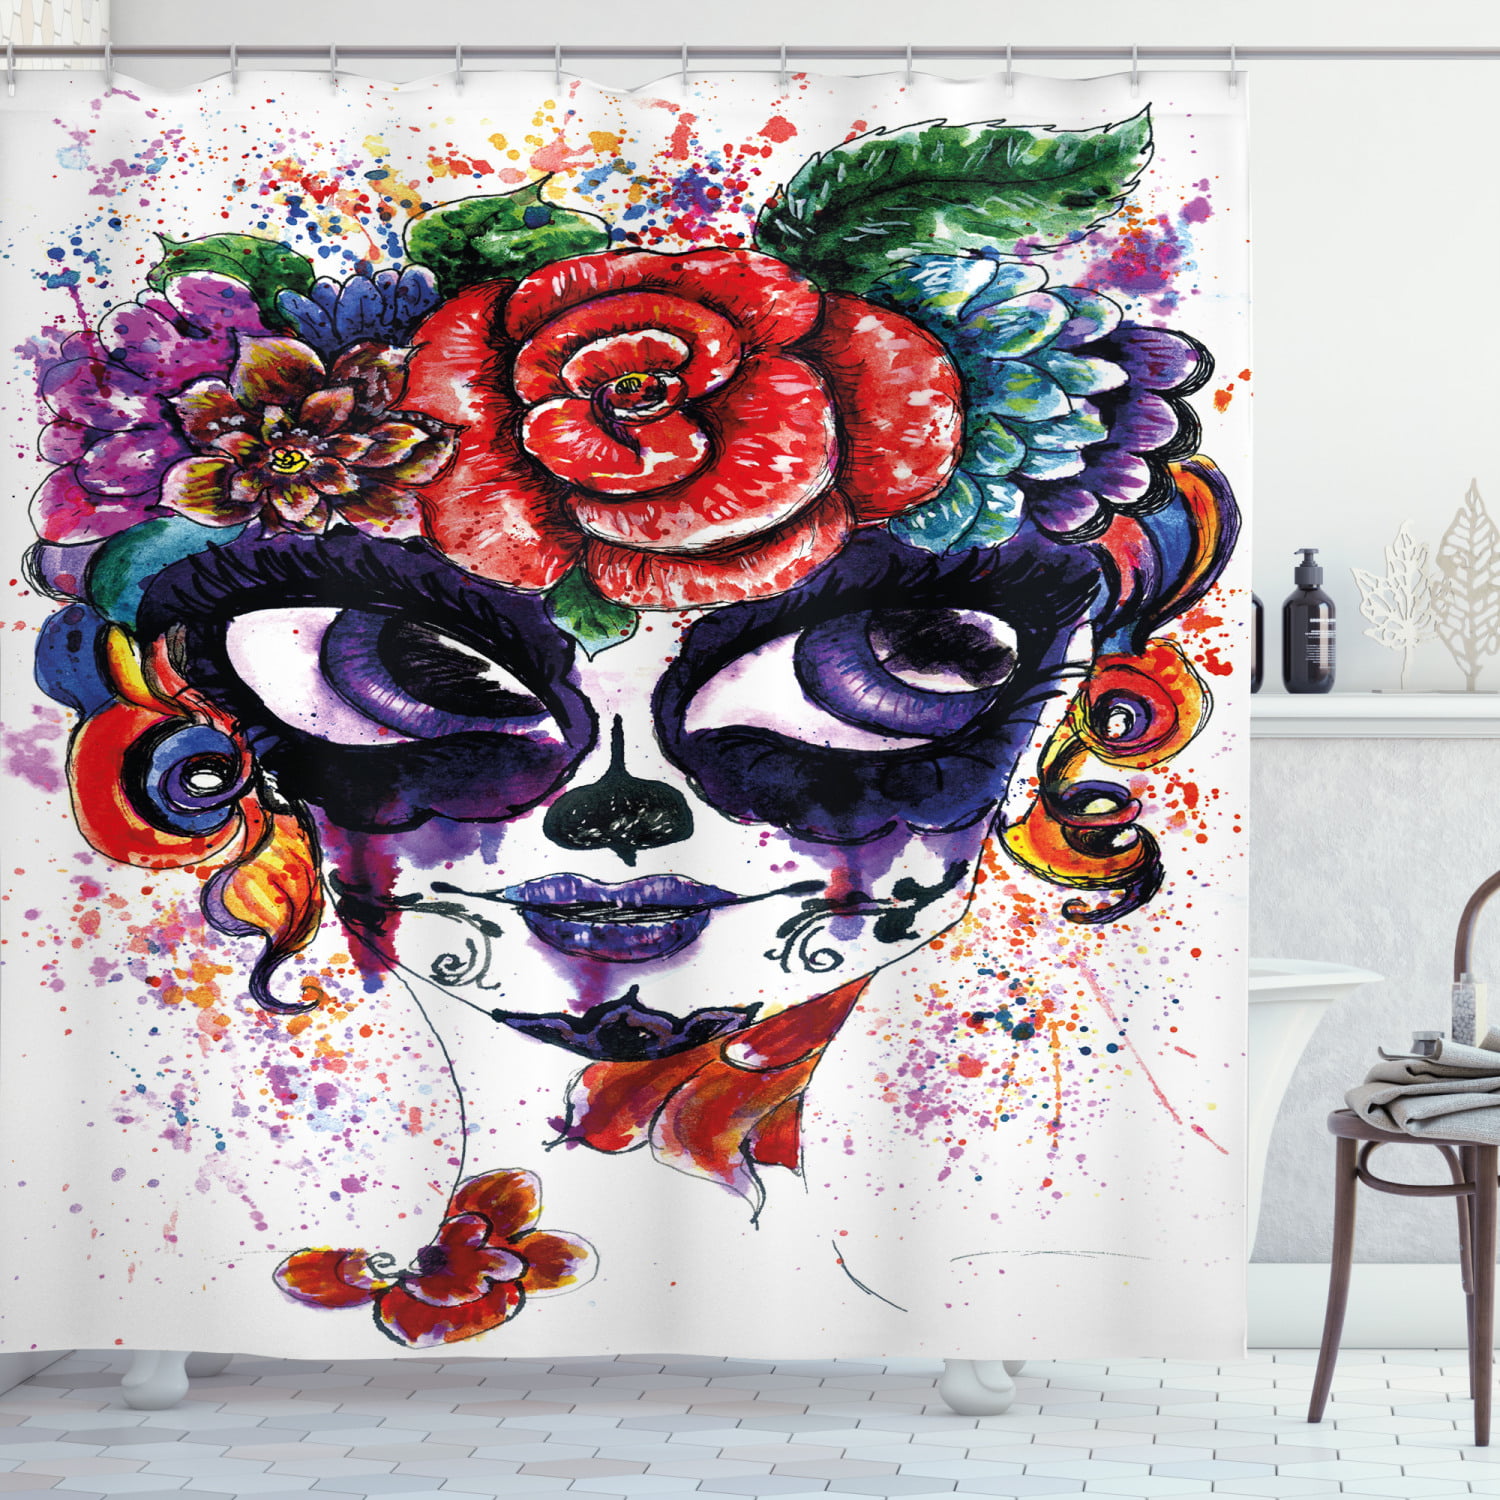 Details about   Watercolor Sugar Skull Butterfly Shower Curtain For Bathroom Decor w/ Free Hooks 